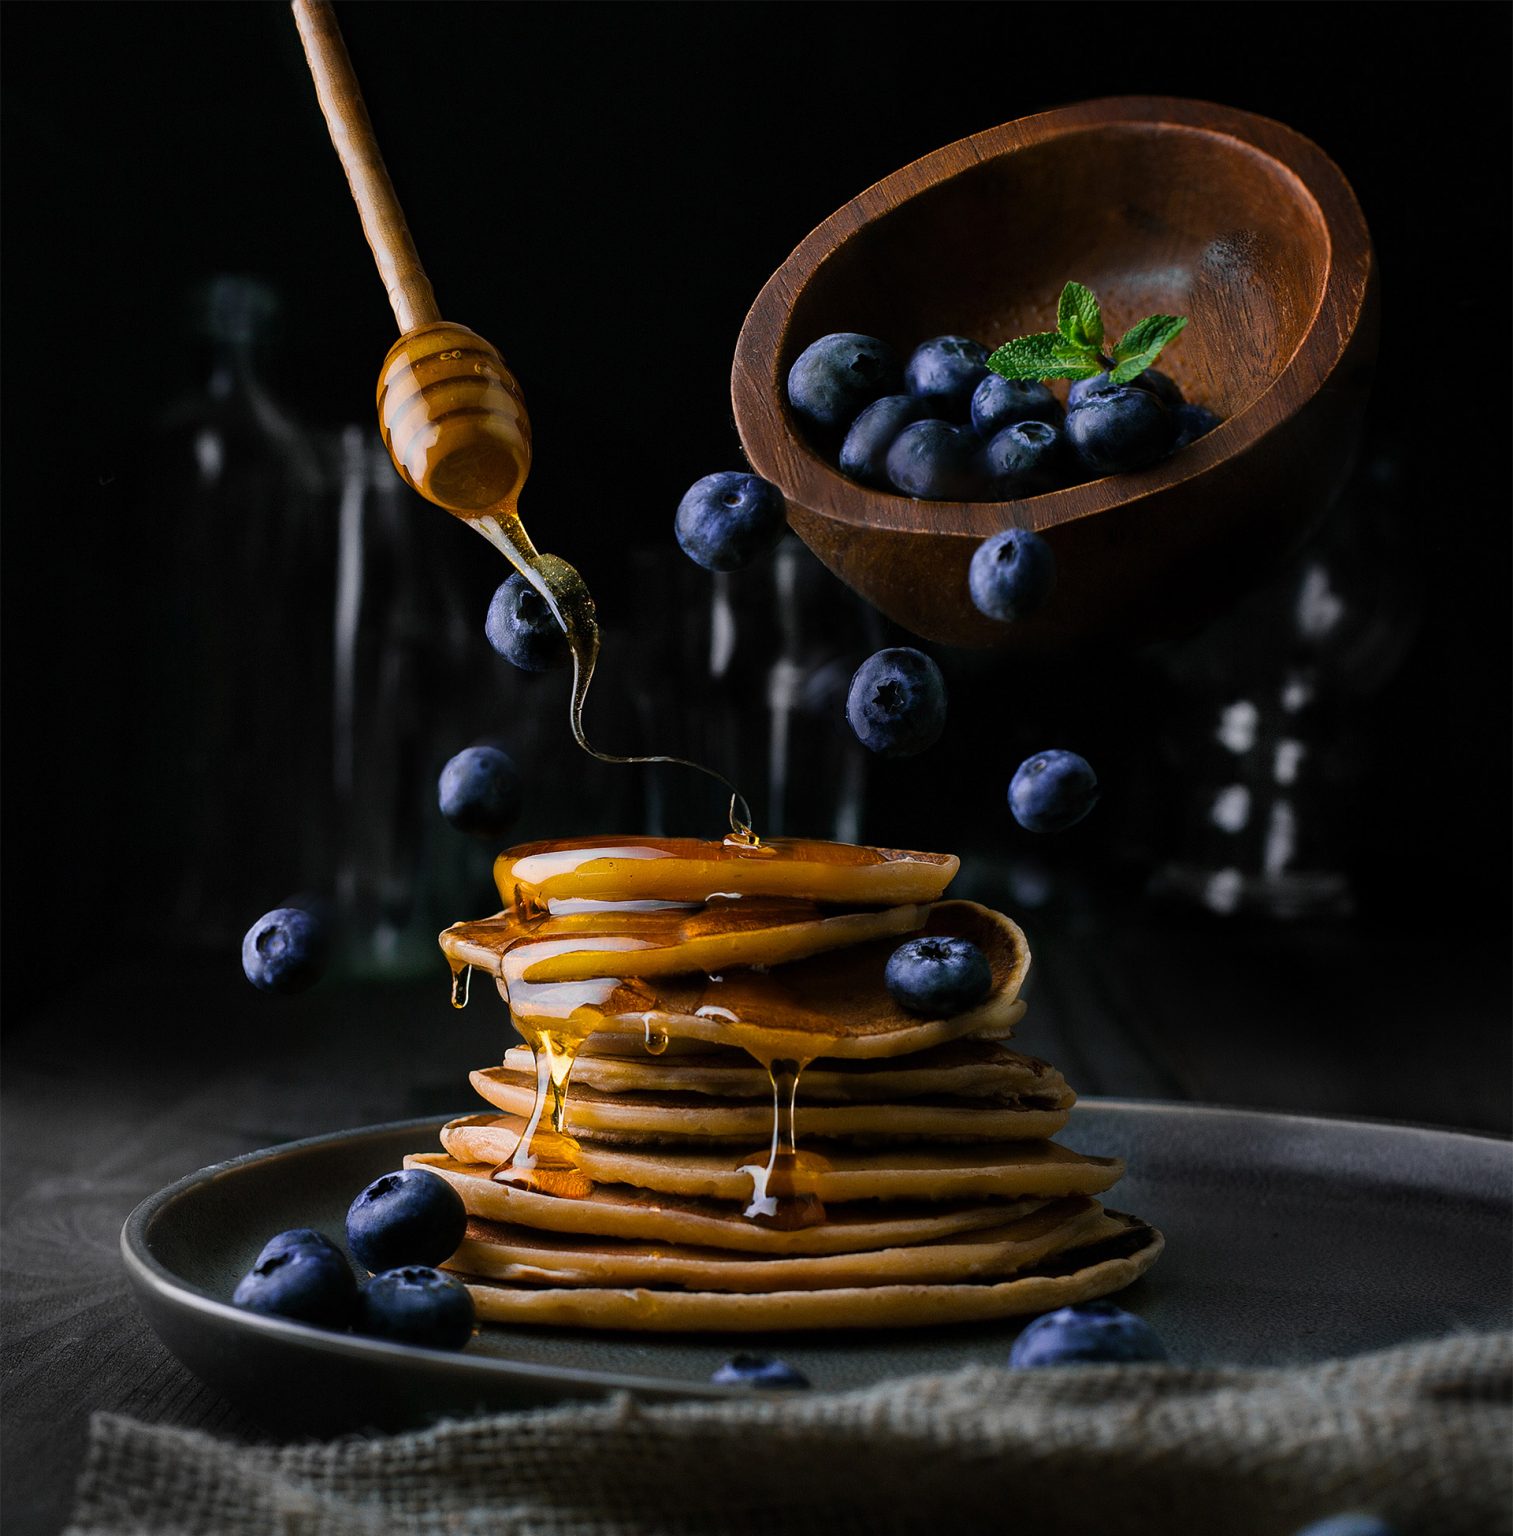 Creative Food Photography By Pavel Sablya Daily Design Inspiration For Creatives Inspiration 9837